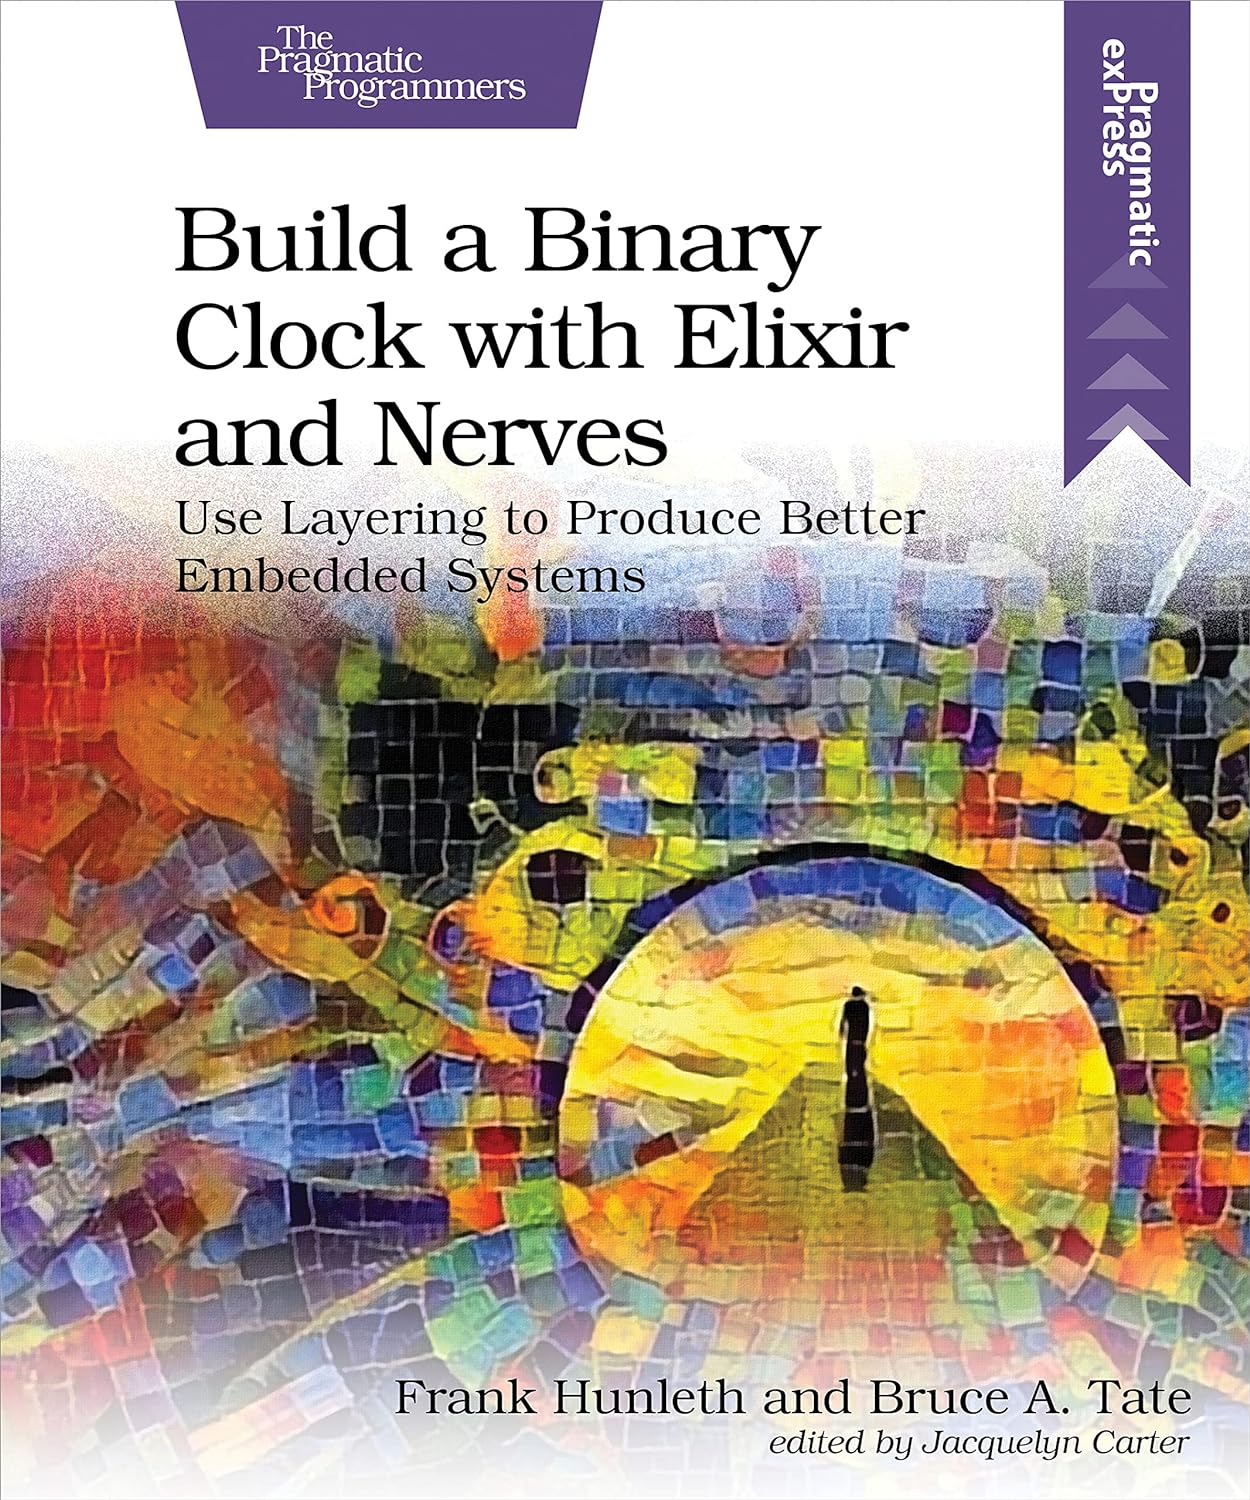 Build a Binary Clock with Elixir and Nerves: Use Layering to Produce Better Embedded Systems by Frank Hunleth